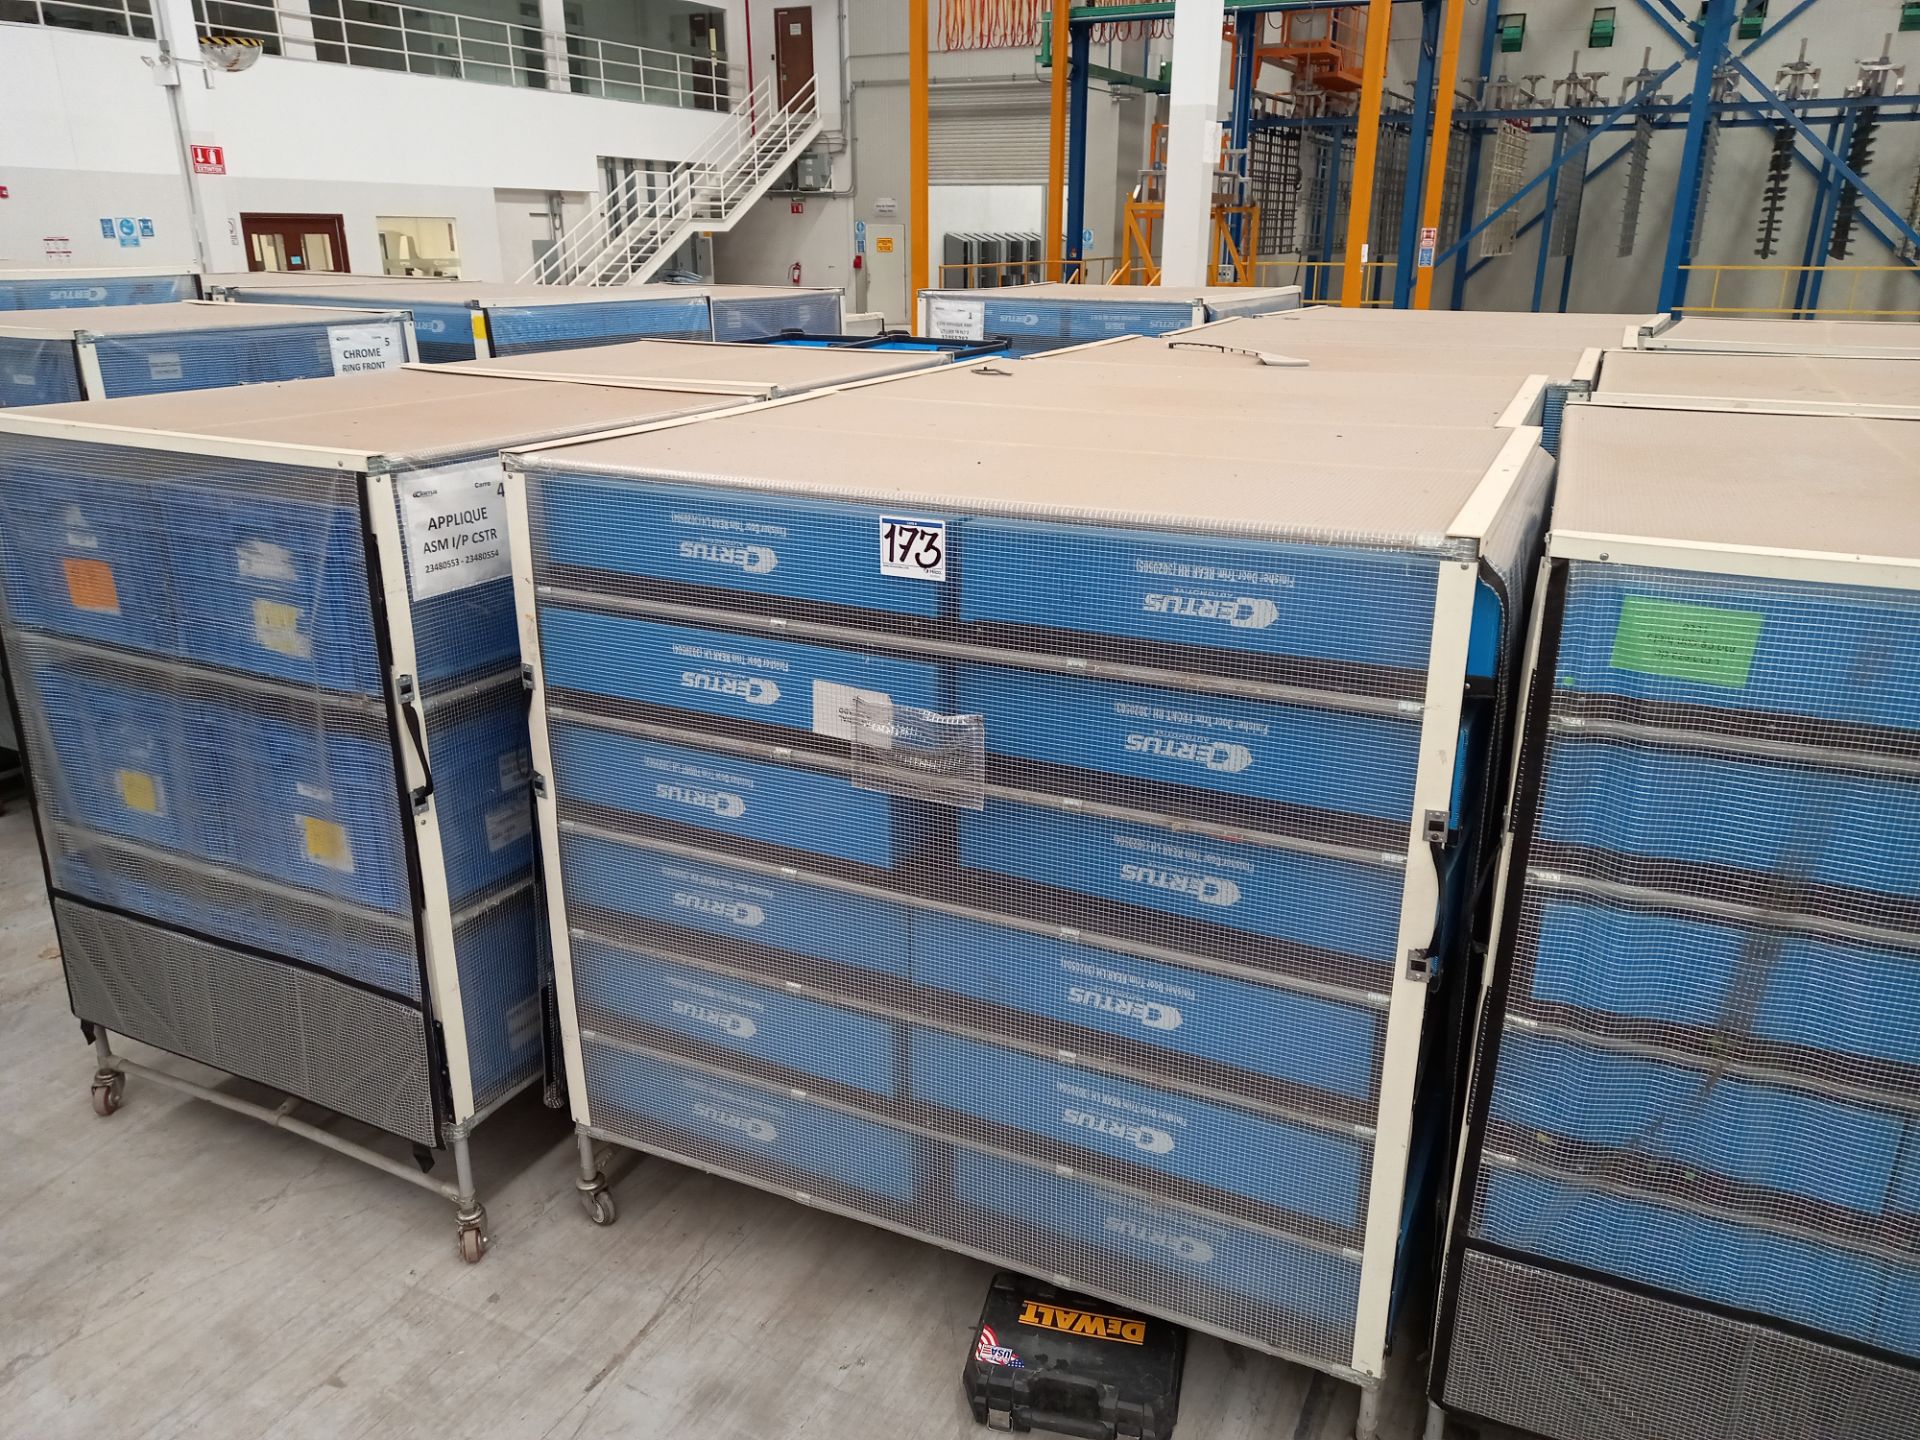 Lot of (56) Assorted Mobile Storage Carts, Different Sizes - Image 3 of 9